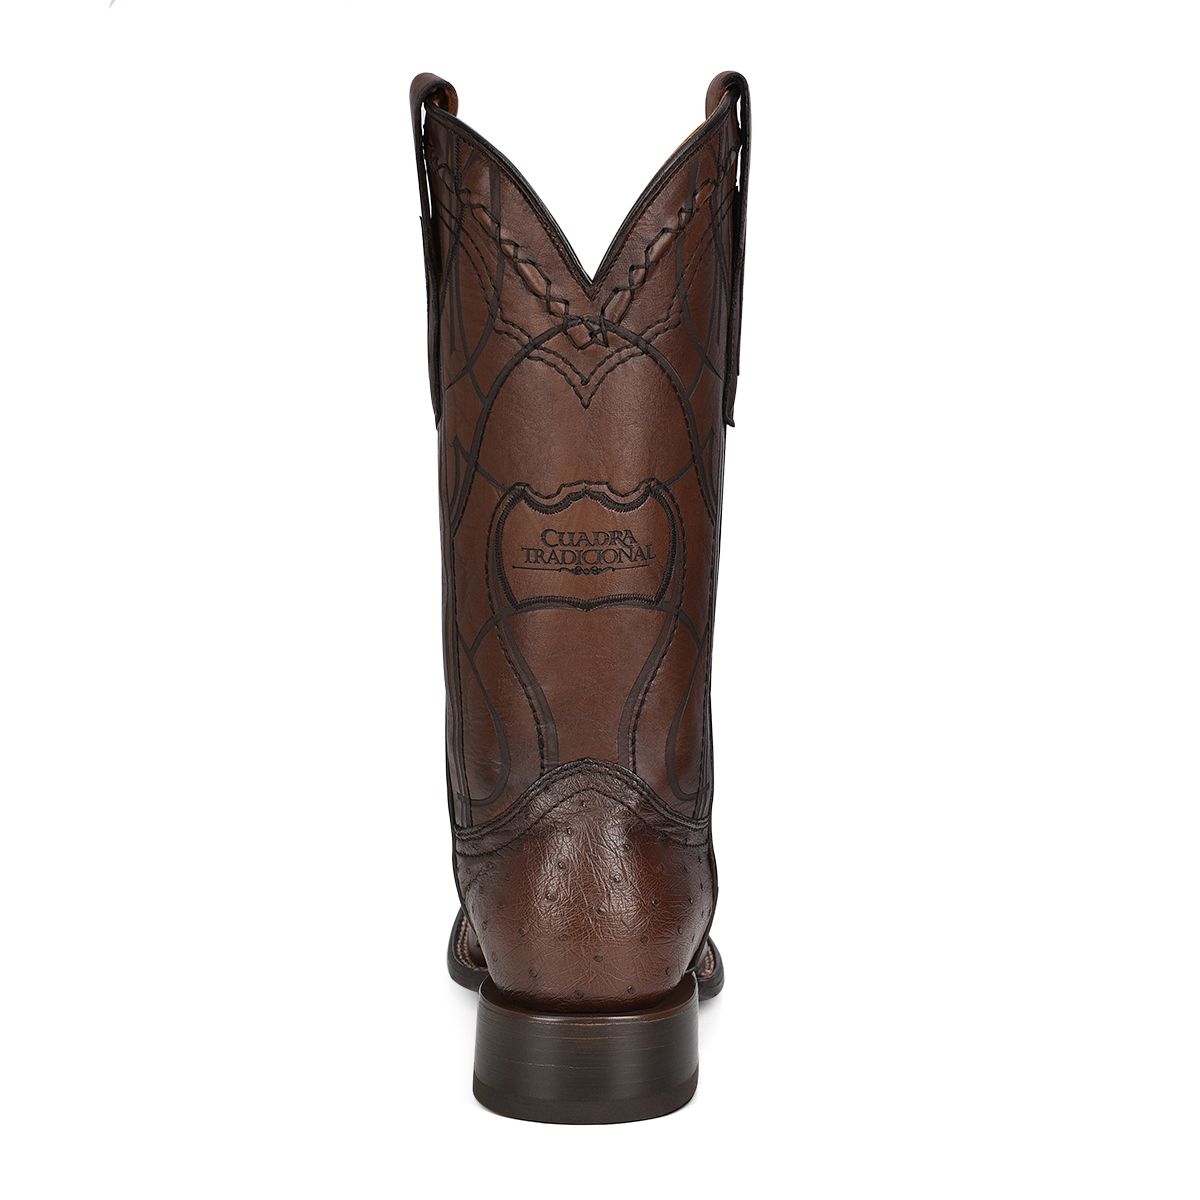 3Z1OA1 - Cuadra chocolate cowboy rodeo ostrich leather boots for men-Kuet.us